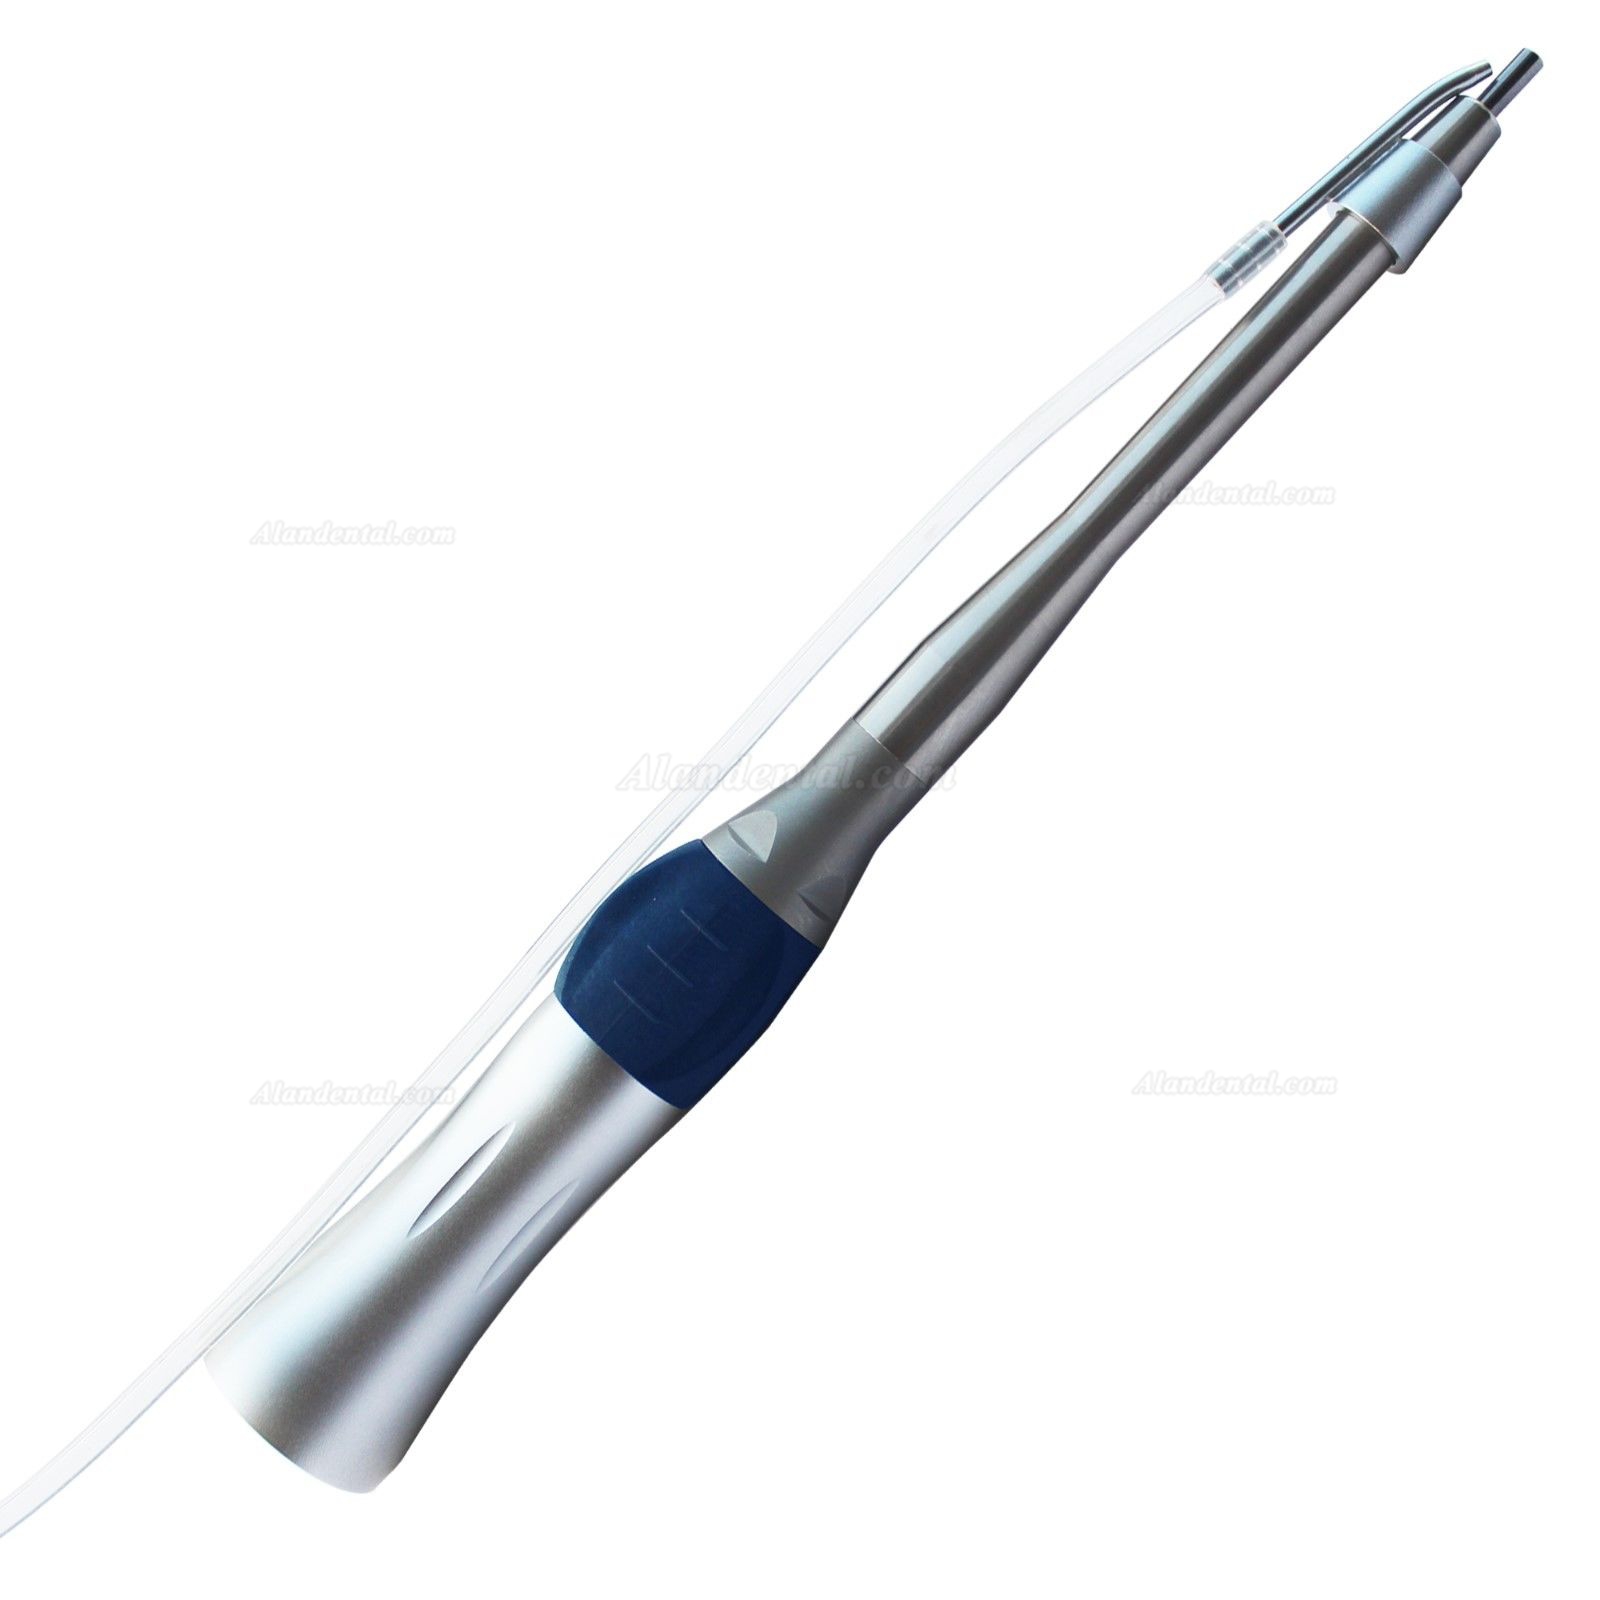 YUSENDENT® CX235-2S2 Dental Surgical Operation Straight Handpiece 1:1 Direct Drive